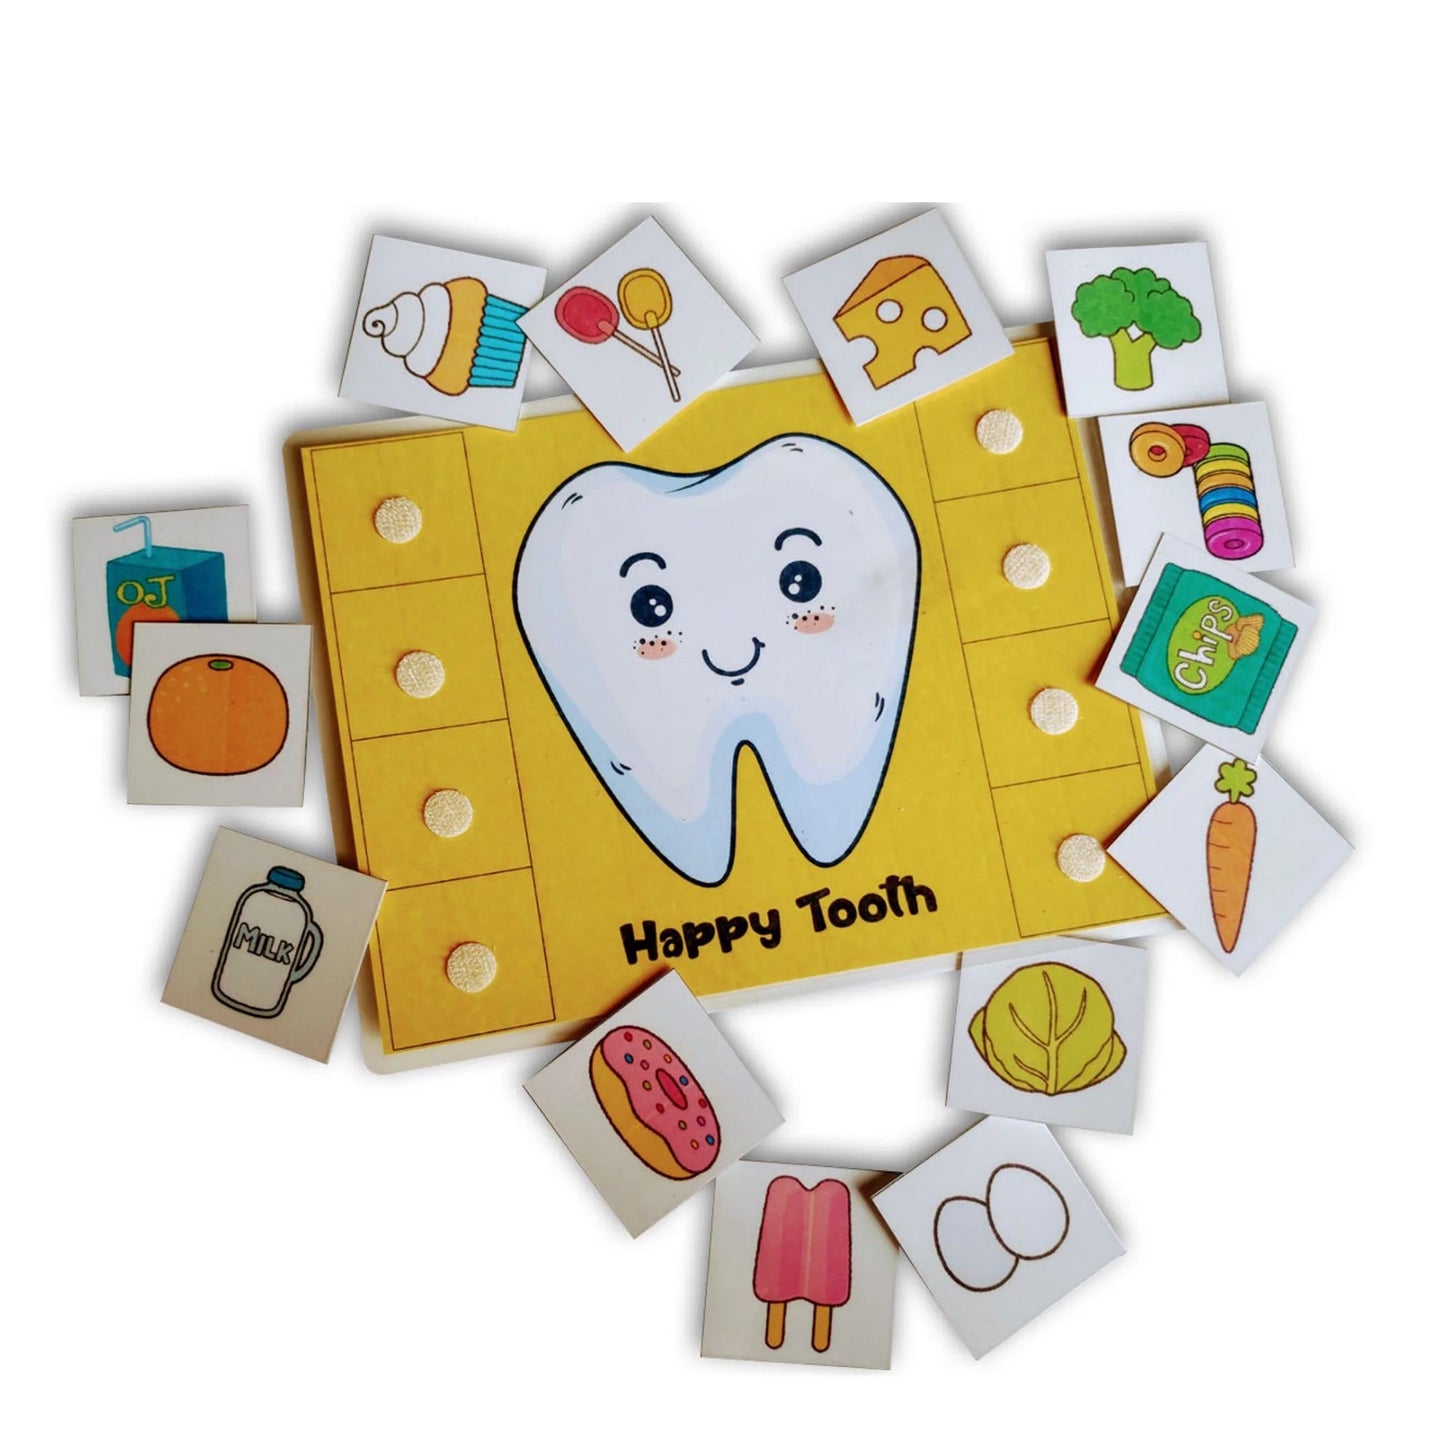 Buy Happy Tooth Sad Tooth Sorting Activity Game - SkilloToys.com